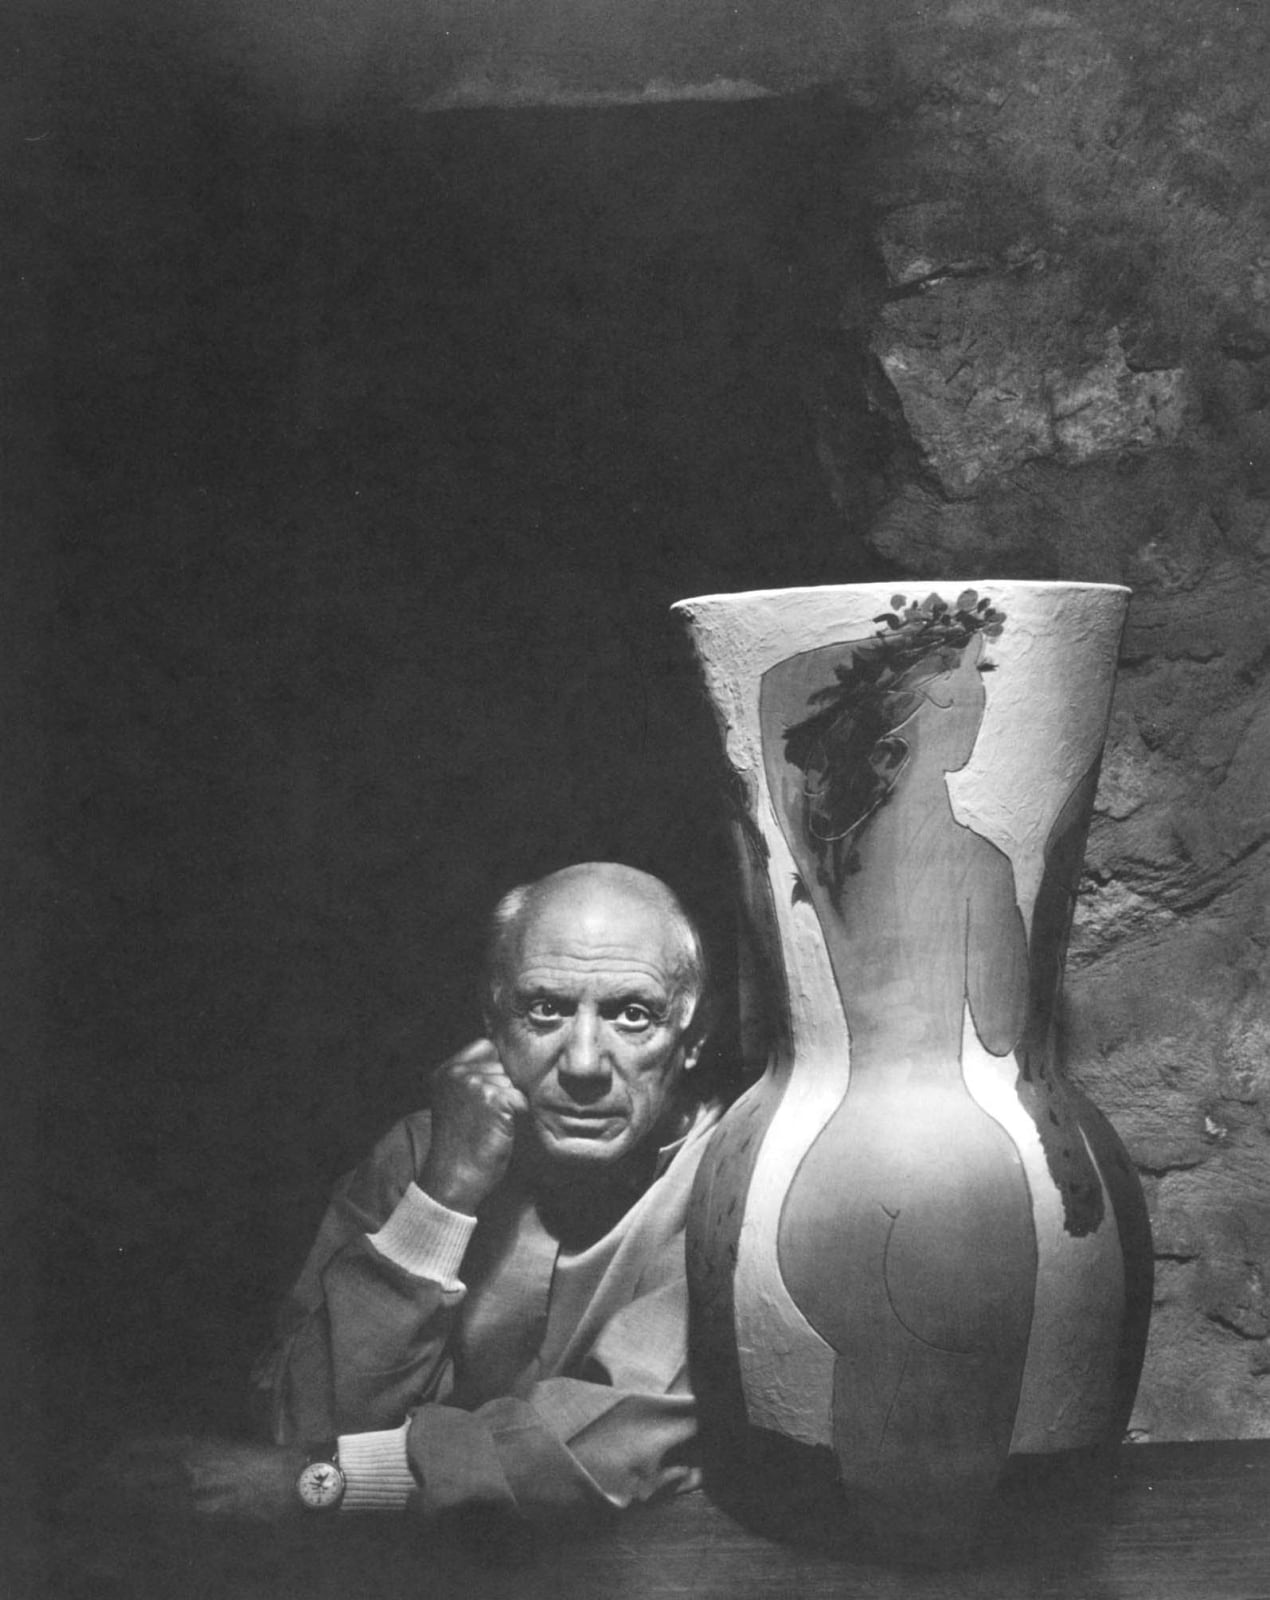 Yousuf Karsh, Pablo Picasso, 1954